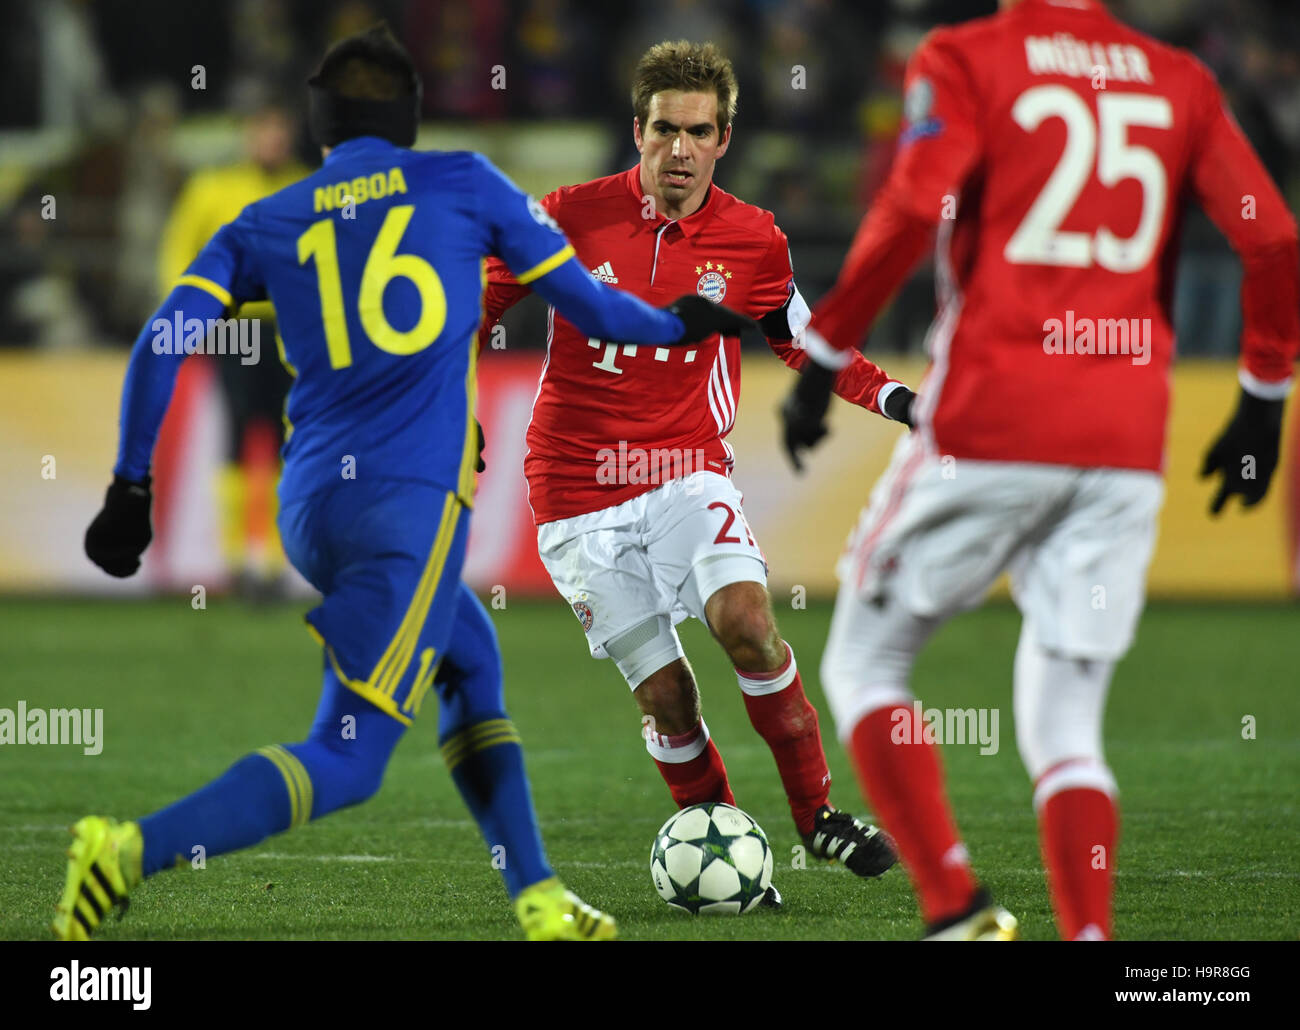 Rostov-on-Don, Russia. 23rd Nov, 2016. Bayern's Philipp Lahm (c) and Thomas Mueller (r) and Christian Noboa (l) of FC Rostov vie for the ball during the Champions League soccer match between FC Rostov and FC Bayern Munich in the Olimp-2 Stadium in Rostov-on-Don, Russia, 23 November 2016. Photo: Peter Kneffel/dpa/Alamy Live News Stock Photo